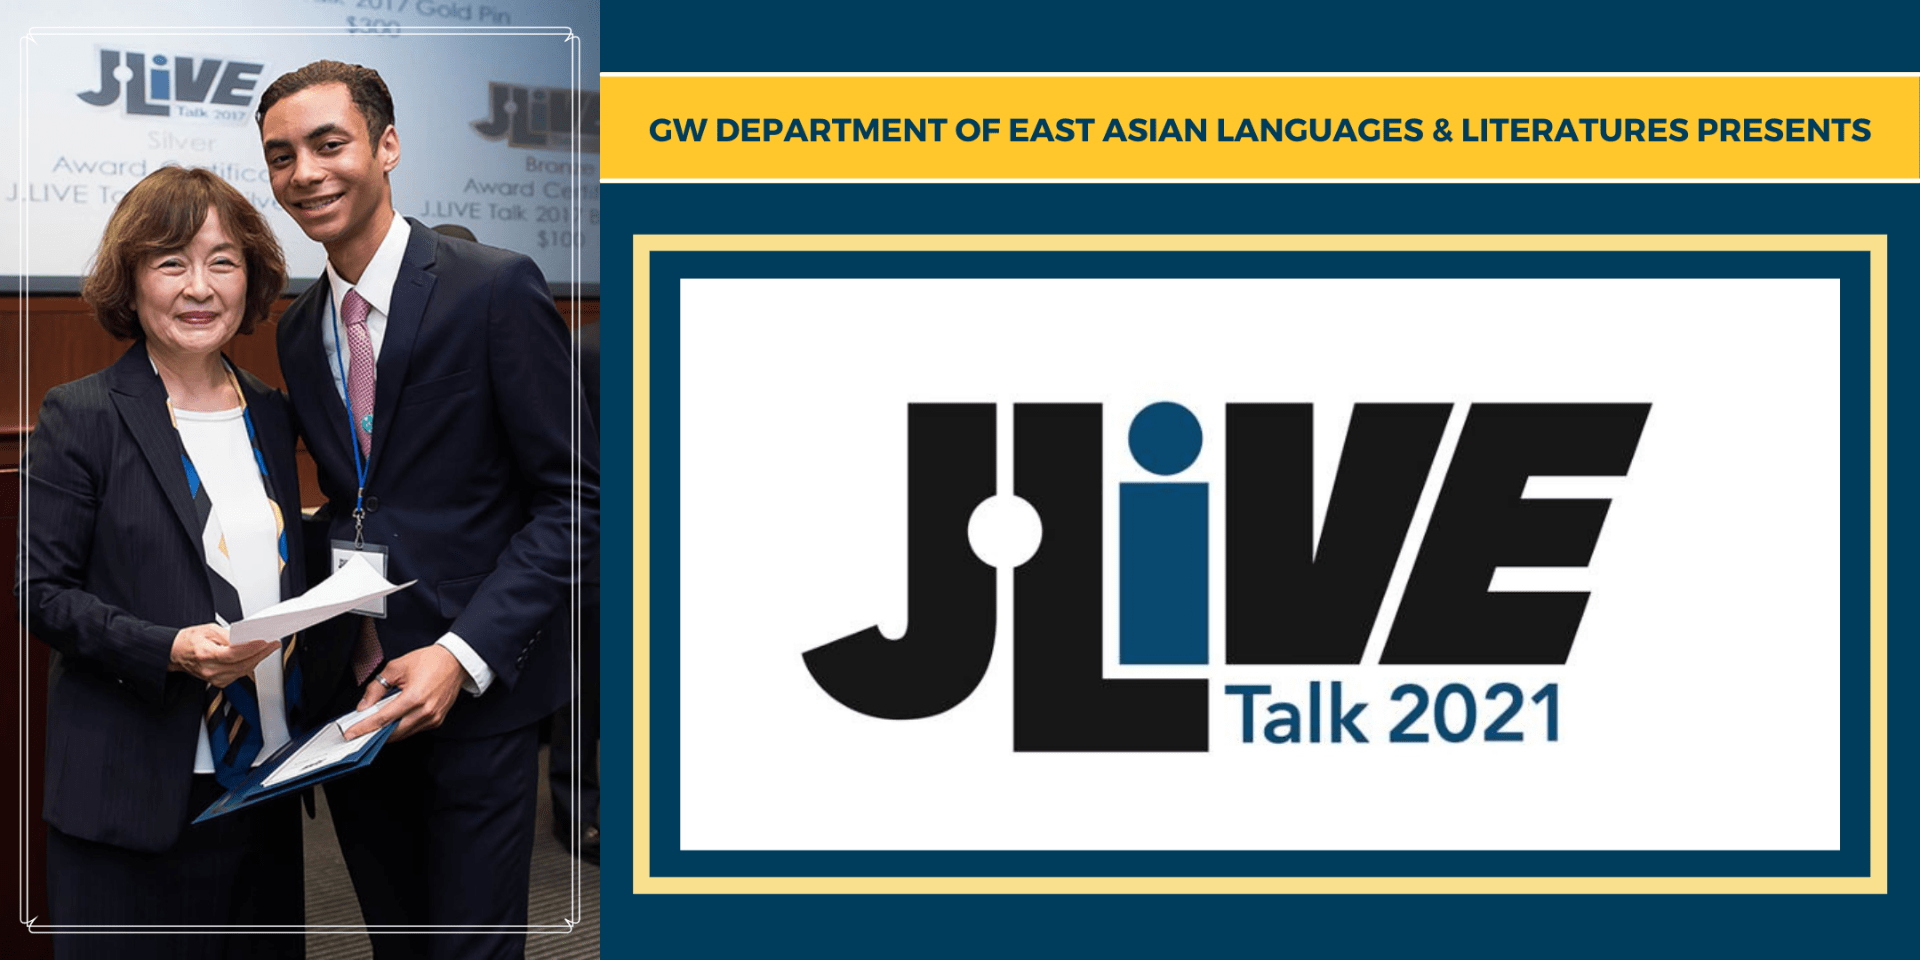 event banner for J.LIVE Talk 2021 with photo from previous year's event